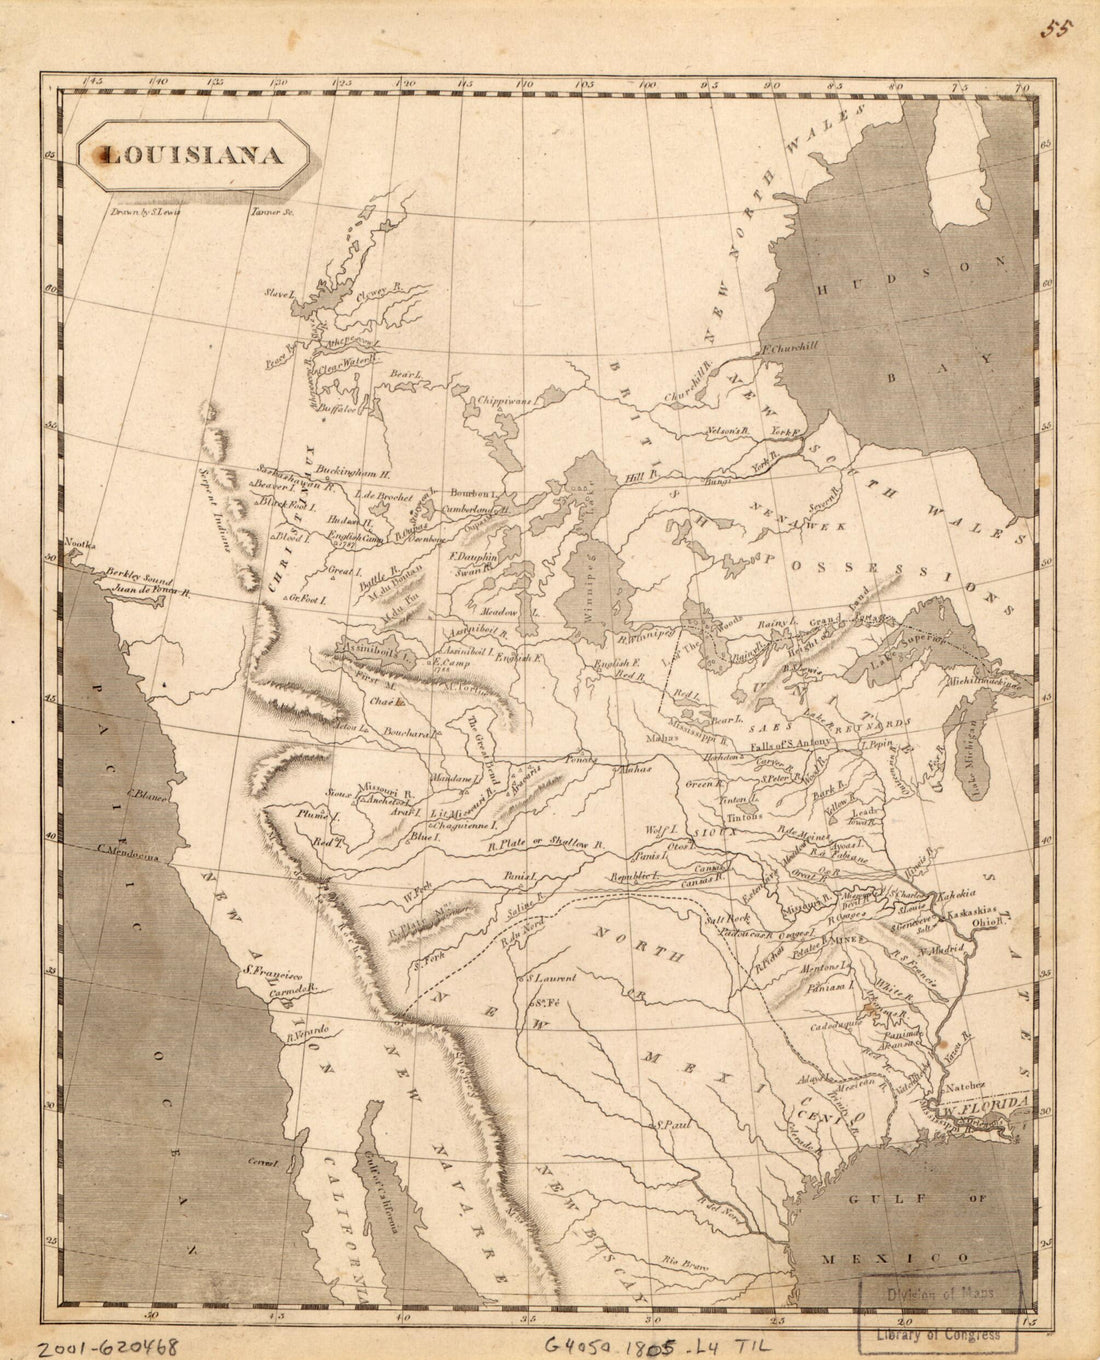 This old map of Louisiana from 1805 was created by Aaron Arrowsmith, Samuel Lewis in 1805